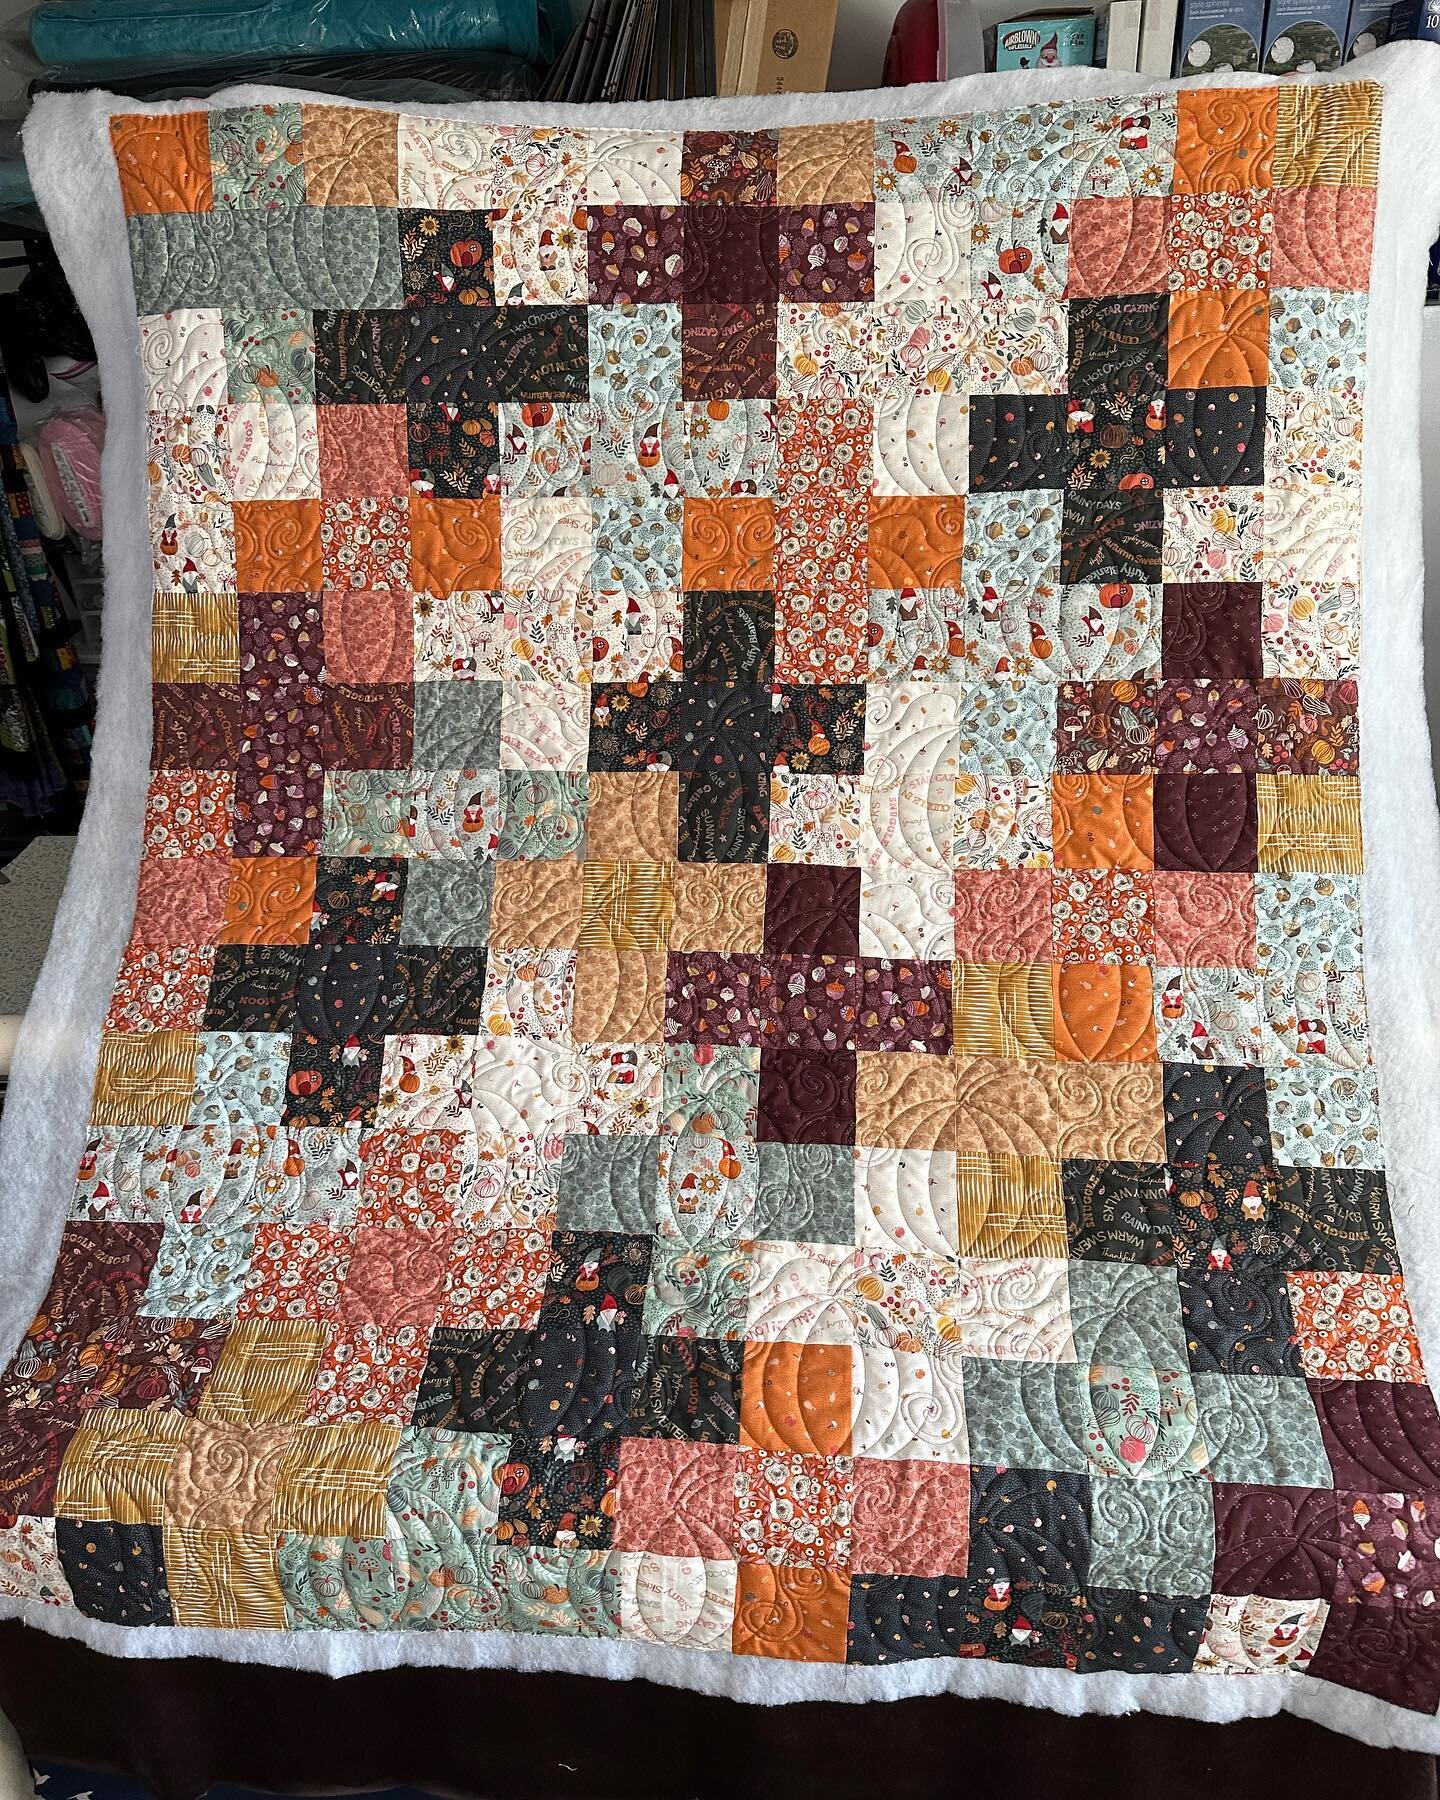 Nothing like Cinderella pumpkins on a warm toned fall quilt. This is as pretty as leaves turning color! @elfmama324 knocked out out of the park and I loved quilting the pumpkins on it🥰🎃. #quiltersofinstagram #fallquilts #quiltsmakemehappy #quilts #